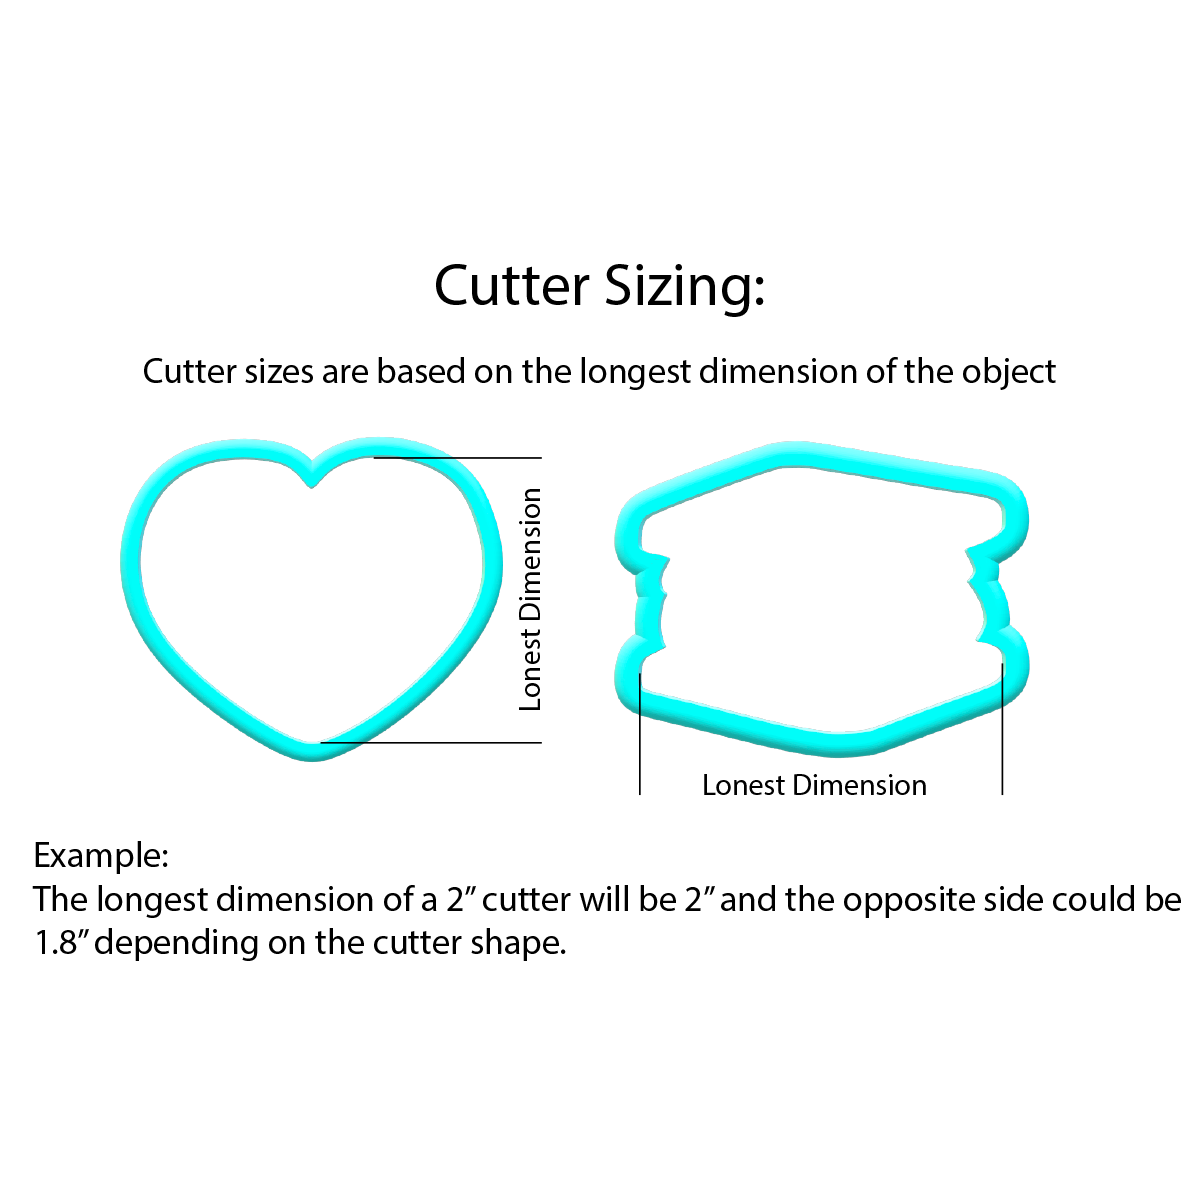 3-Hearts Cookie Cutters | Standard & Imprint Cutters Included | STL Files